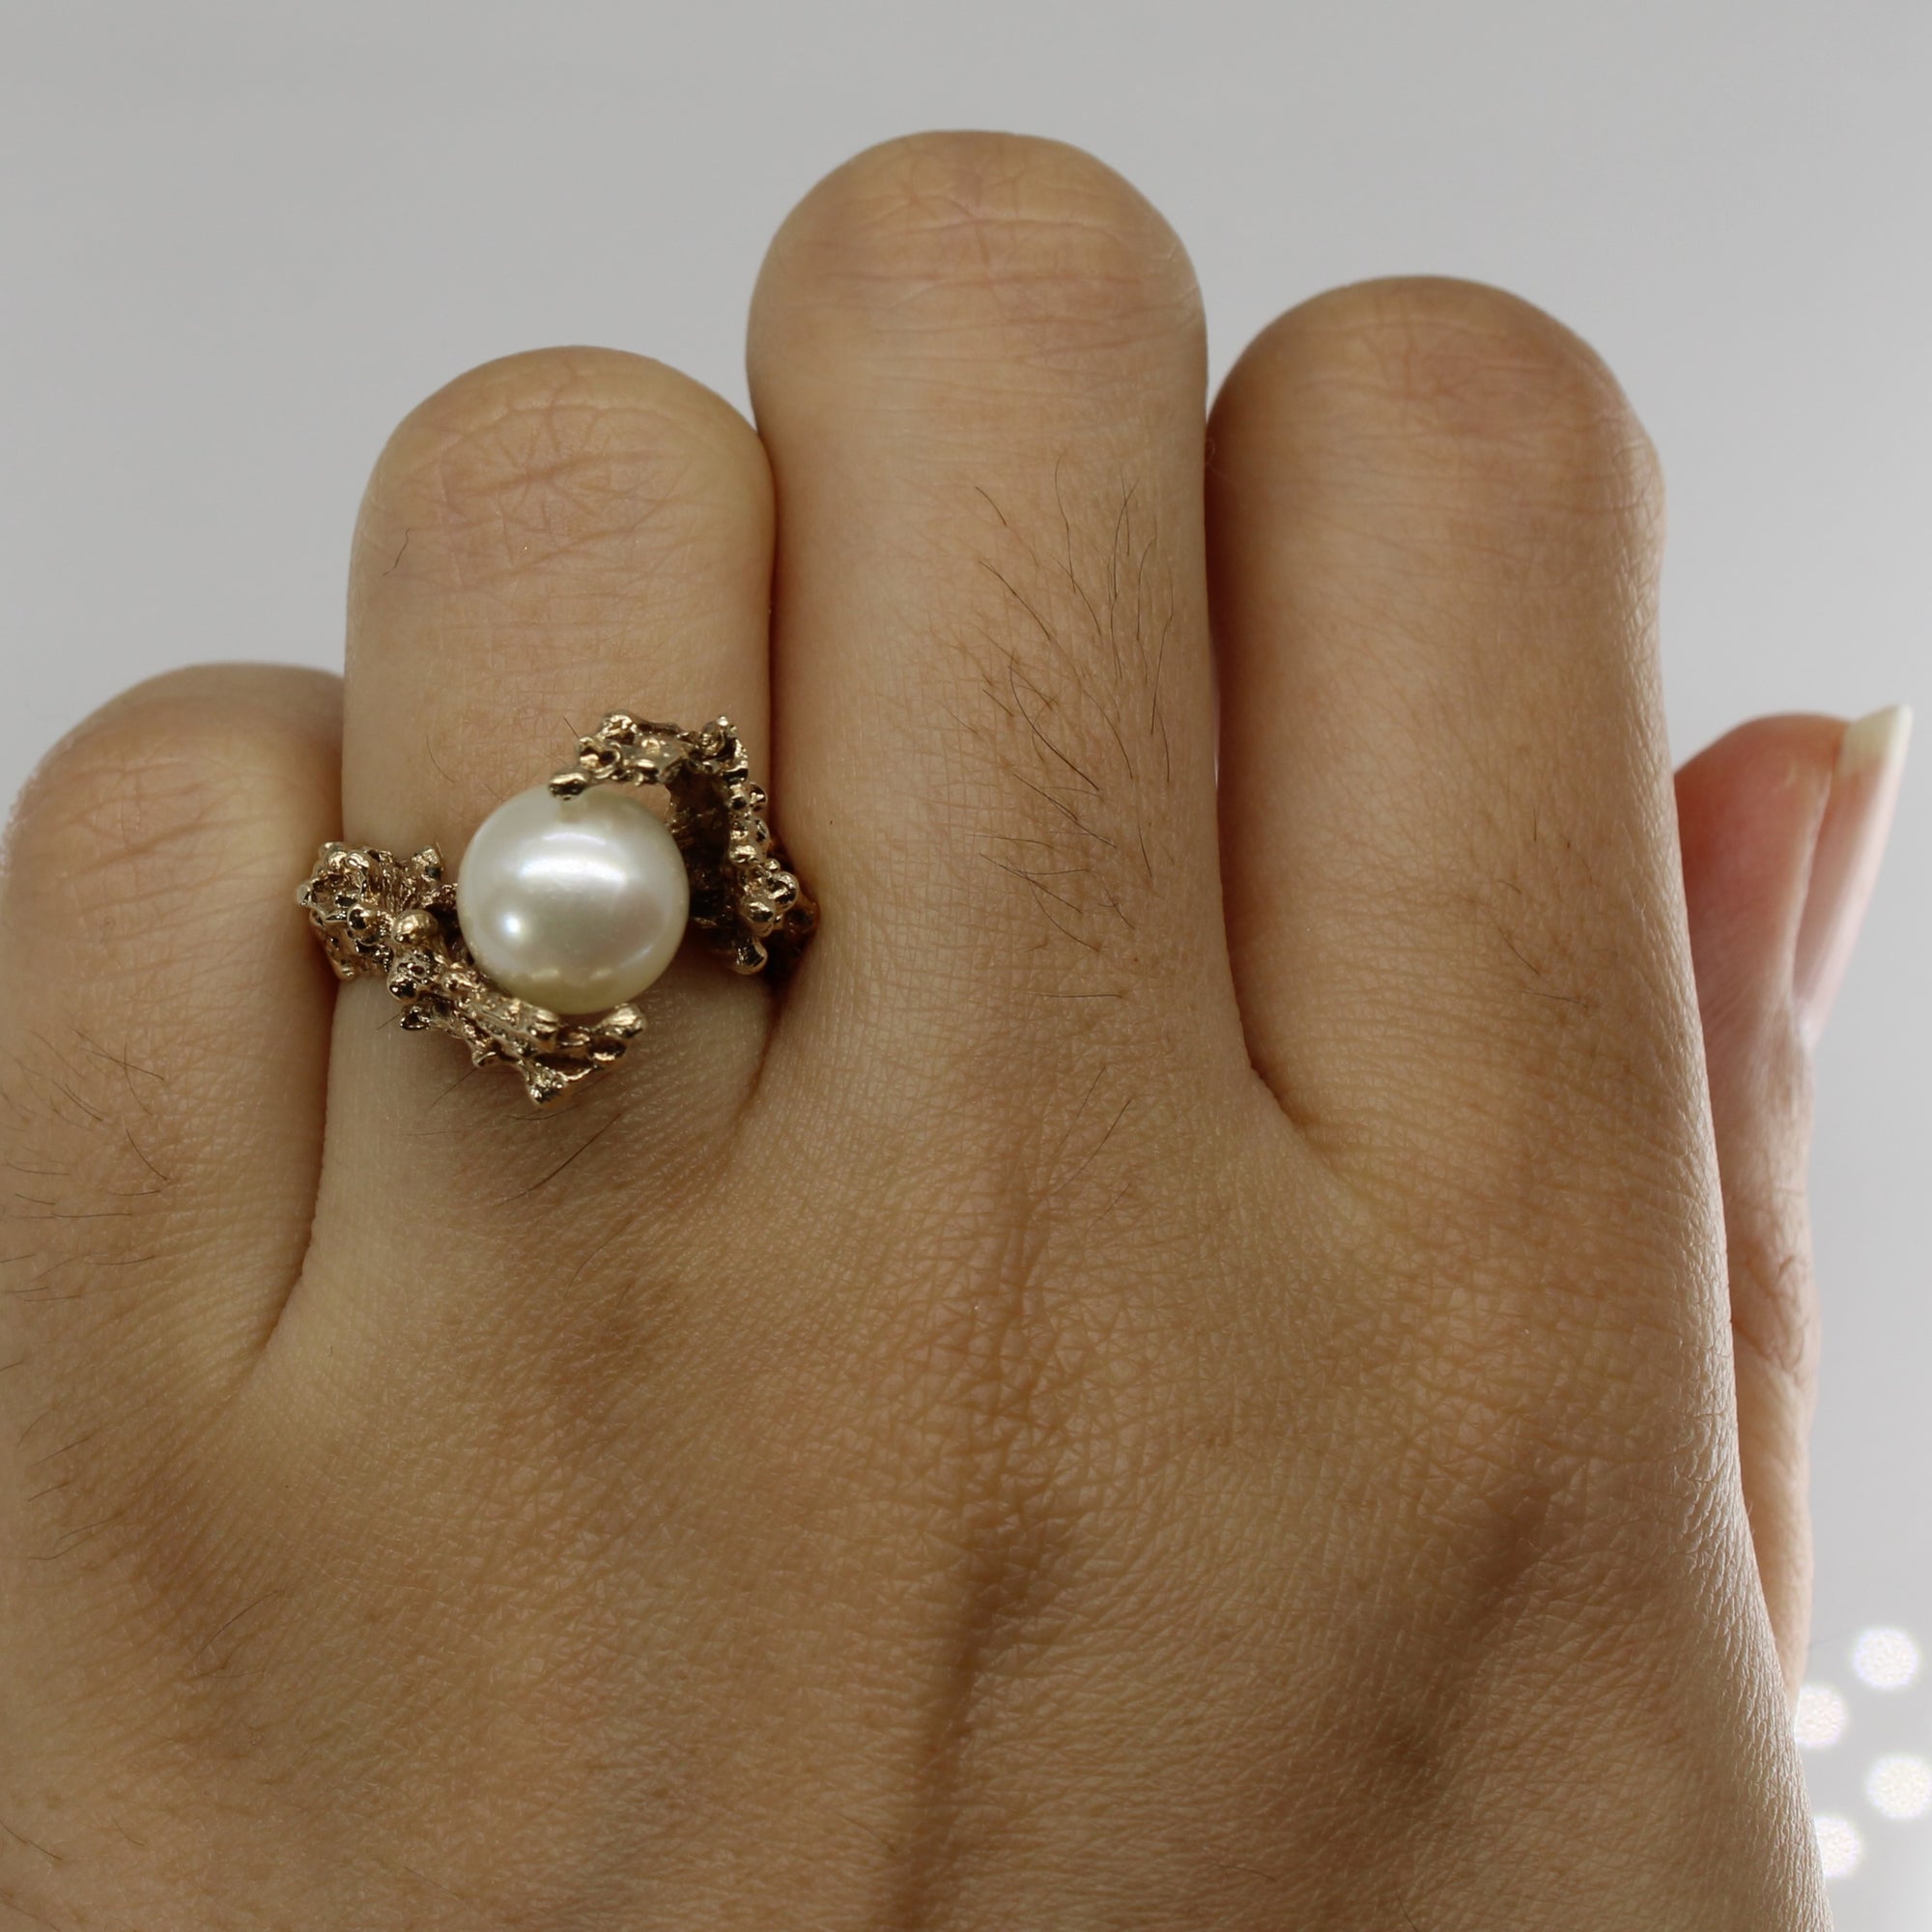 Pearl Bypass Seaweed 14k Ring | SZ 4.5 |